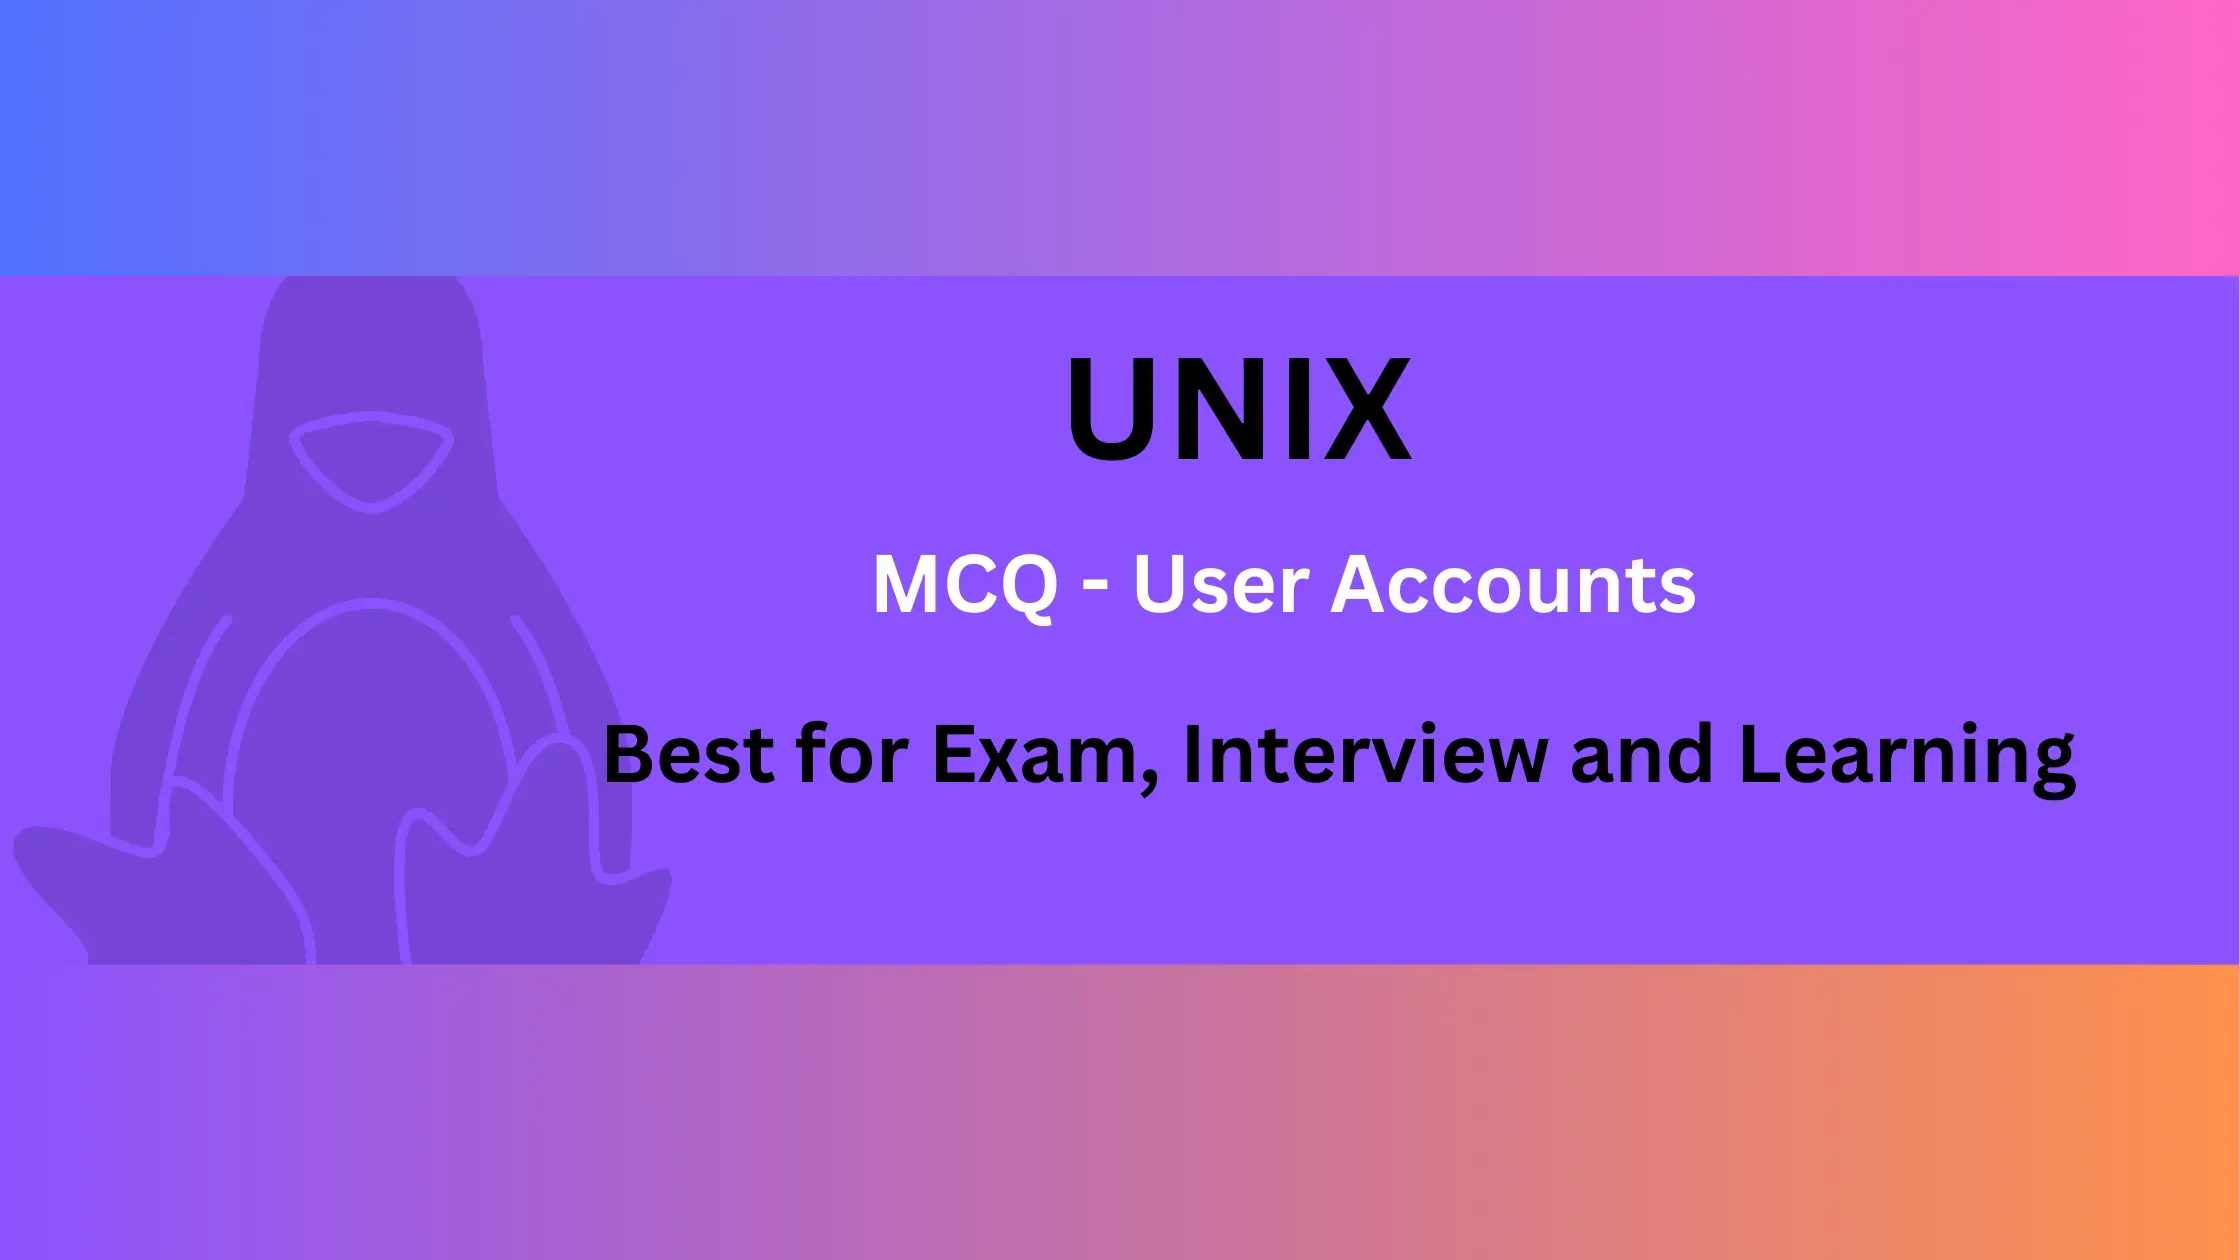 UNIX MCQ Questions and Answers for User Accounts